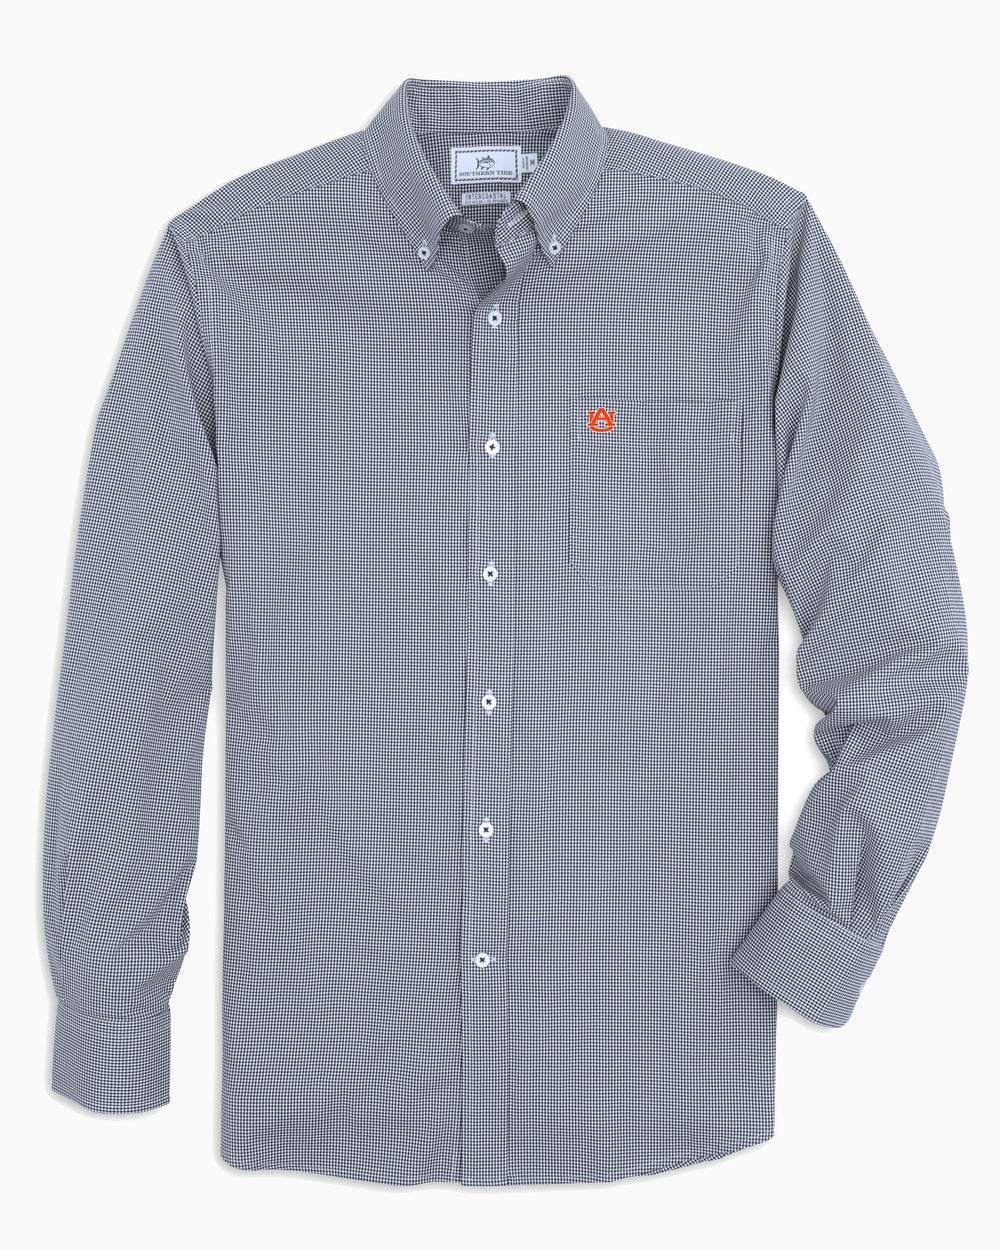 The front view of the Men's Navy Auburn Tigers Gingham Button Down Shirt by Southern Tide - Navy